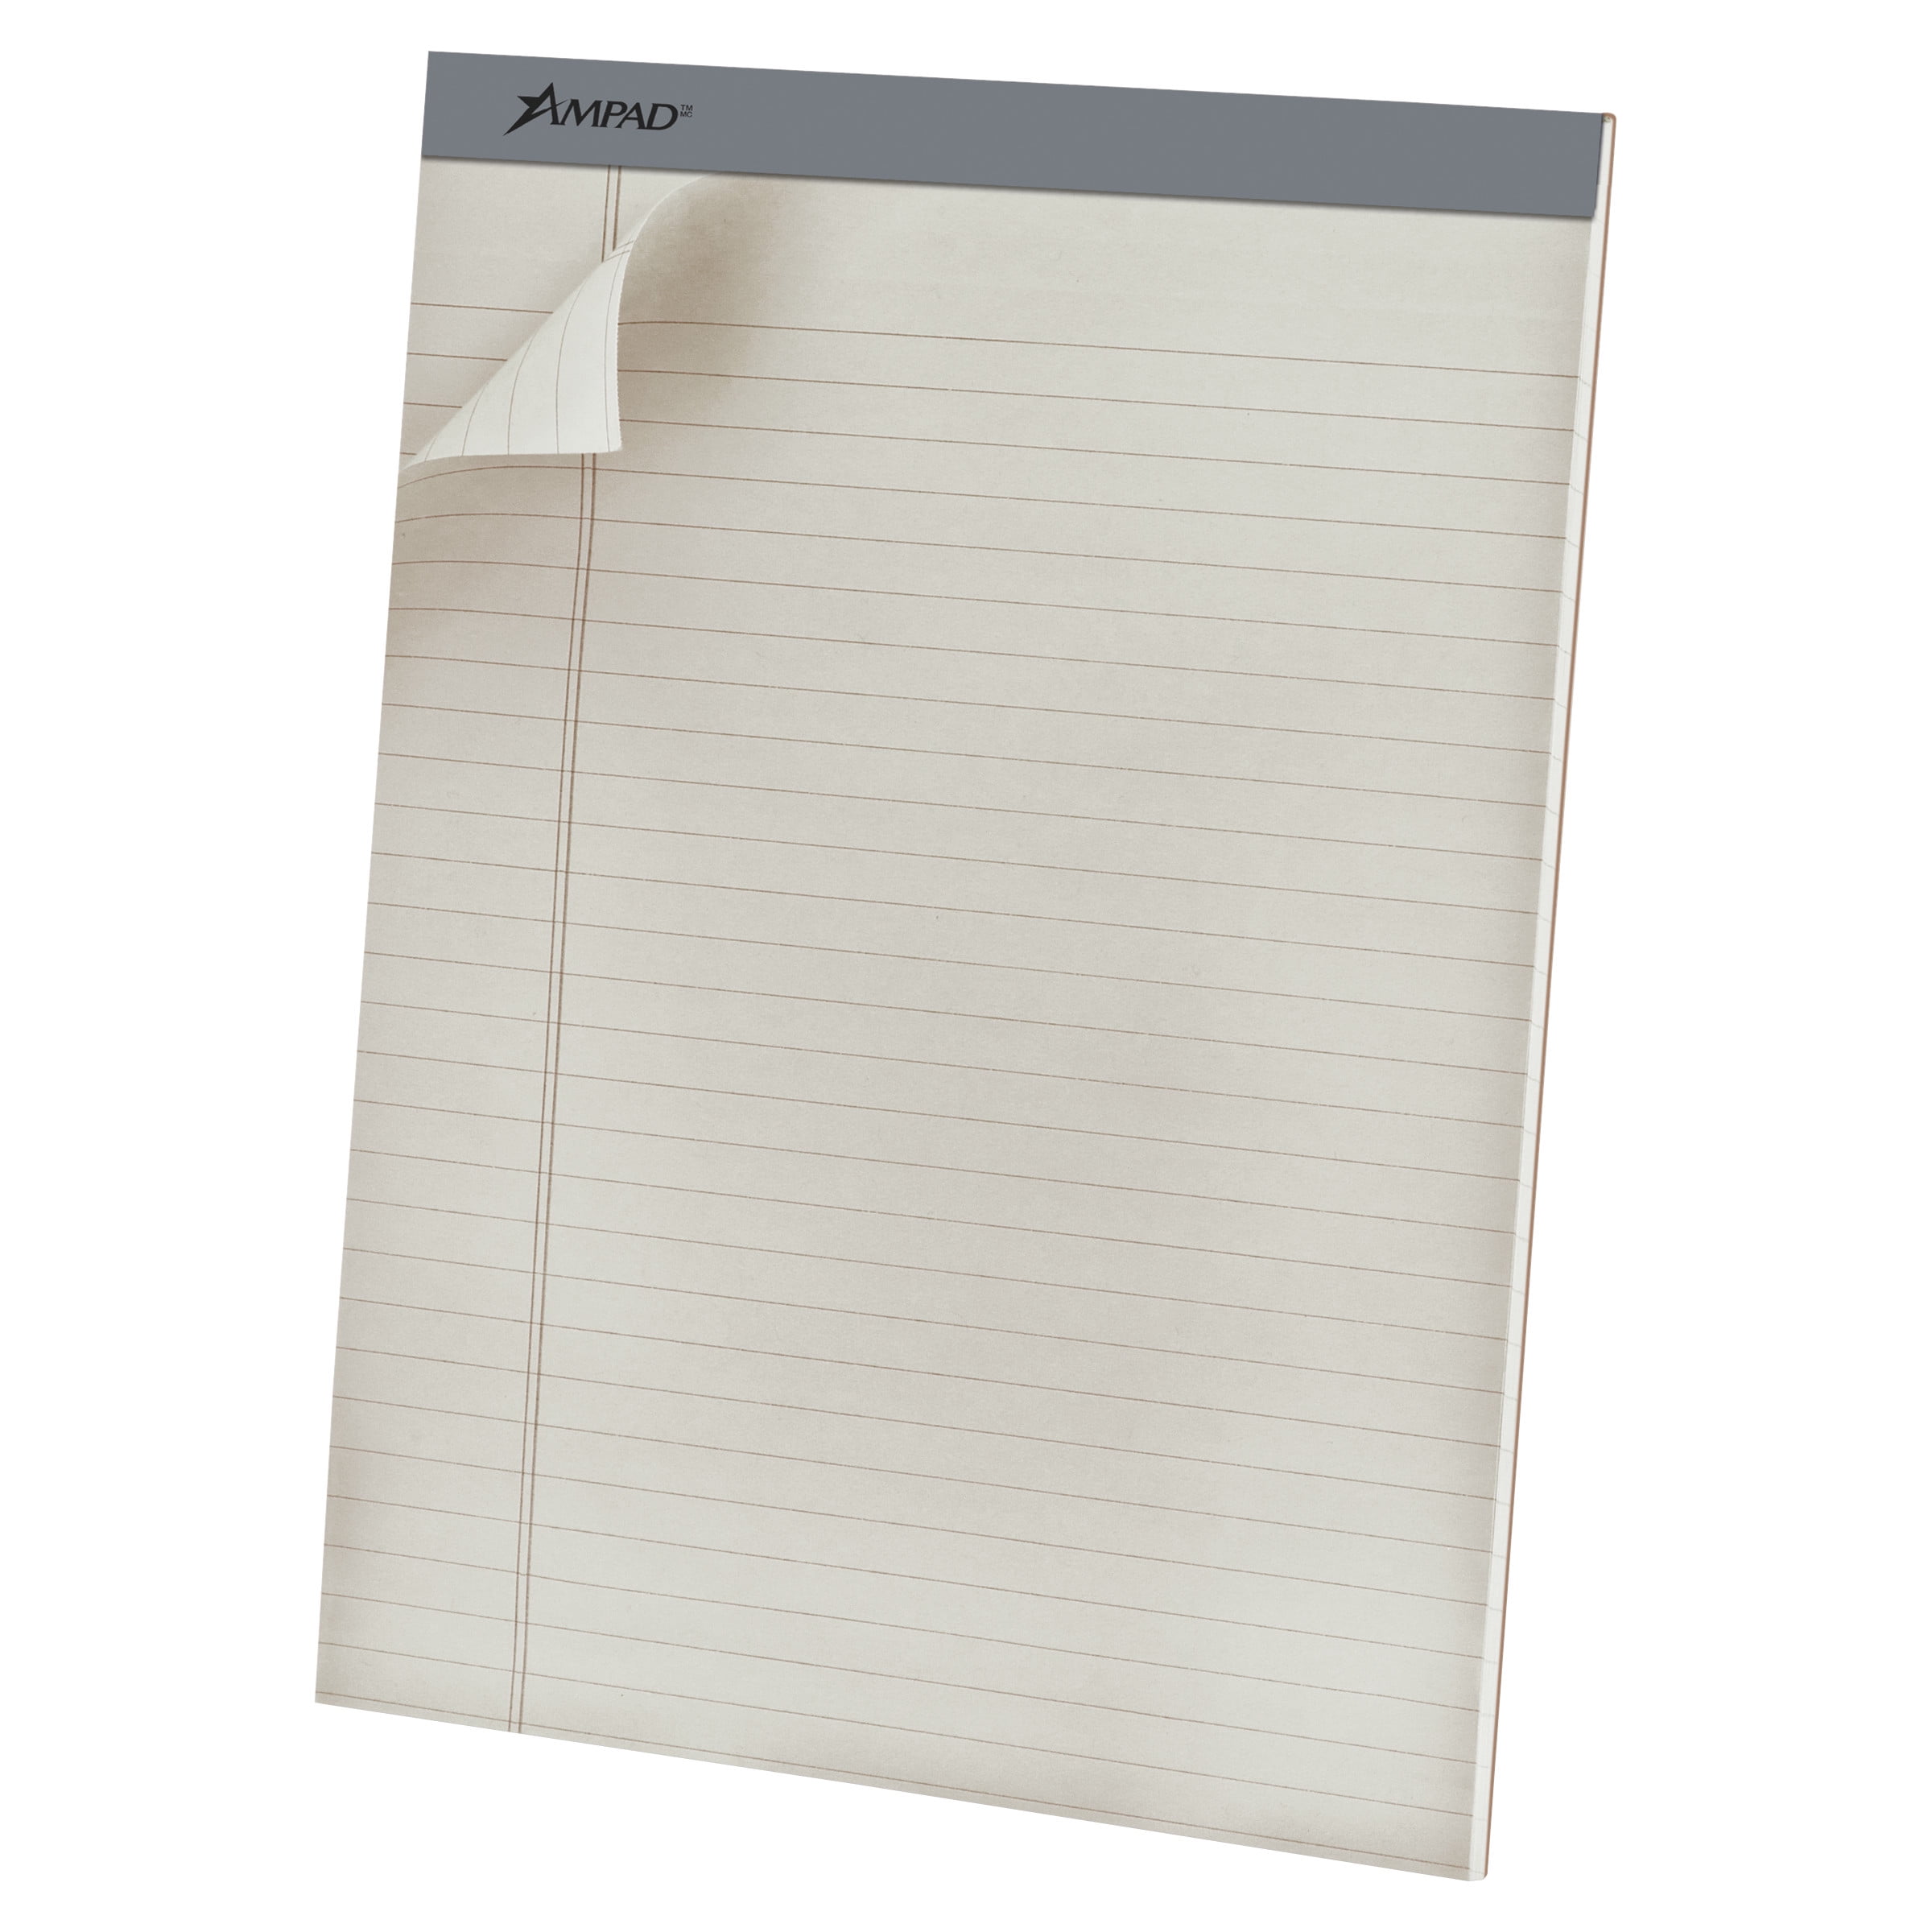 White Basics Legal/Wide Ruled 8-1/2 by 11-3/4 Legal Pad 50 sheets per pad, 12 pack 